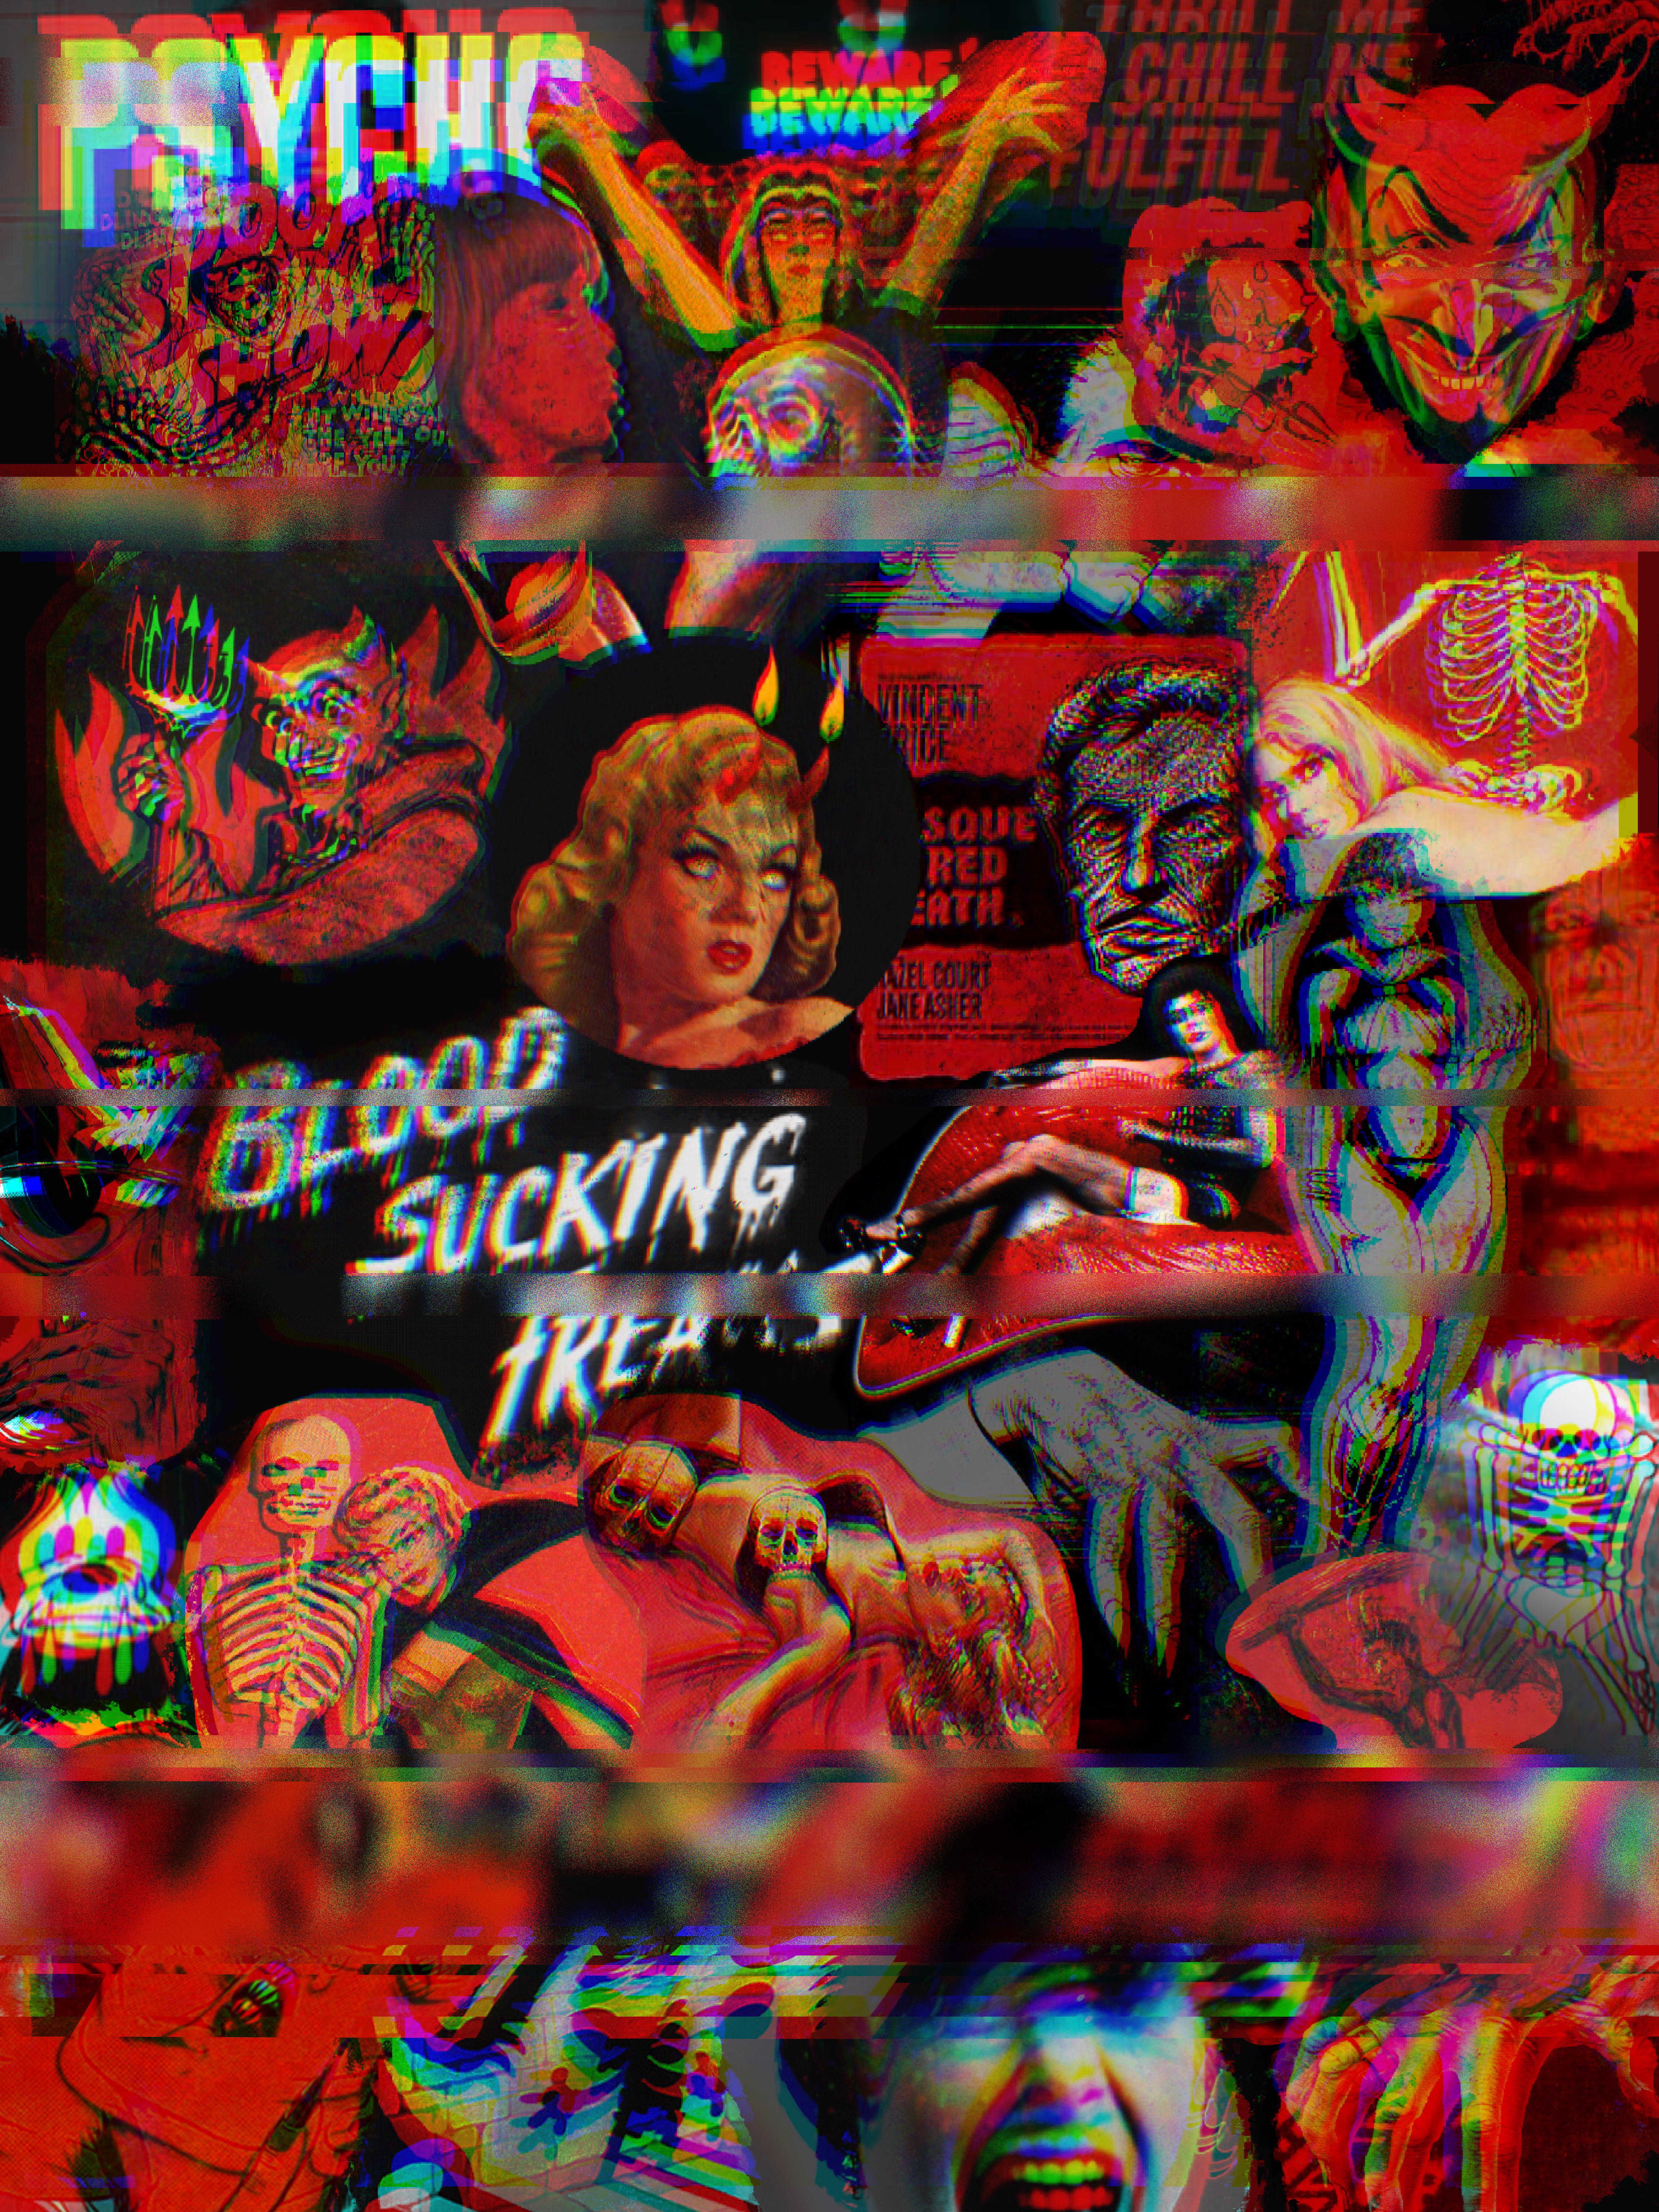 Made a vintage horror collage for my wallpaper this spooky season